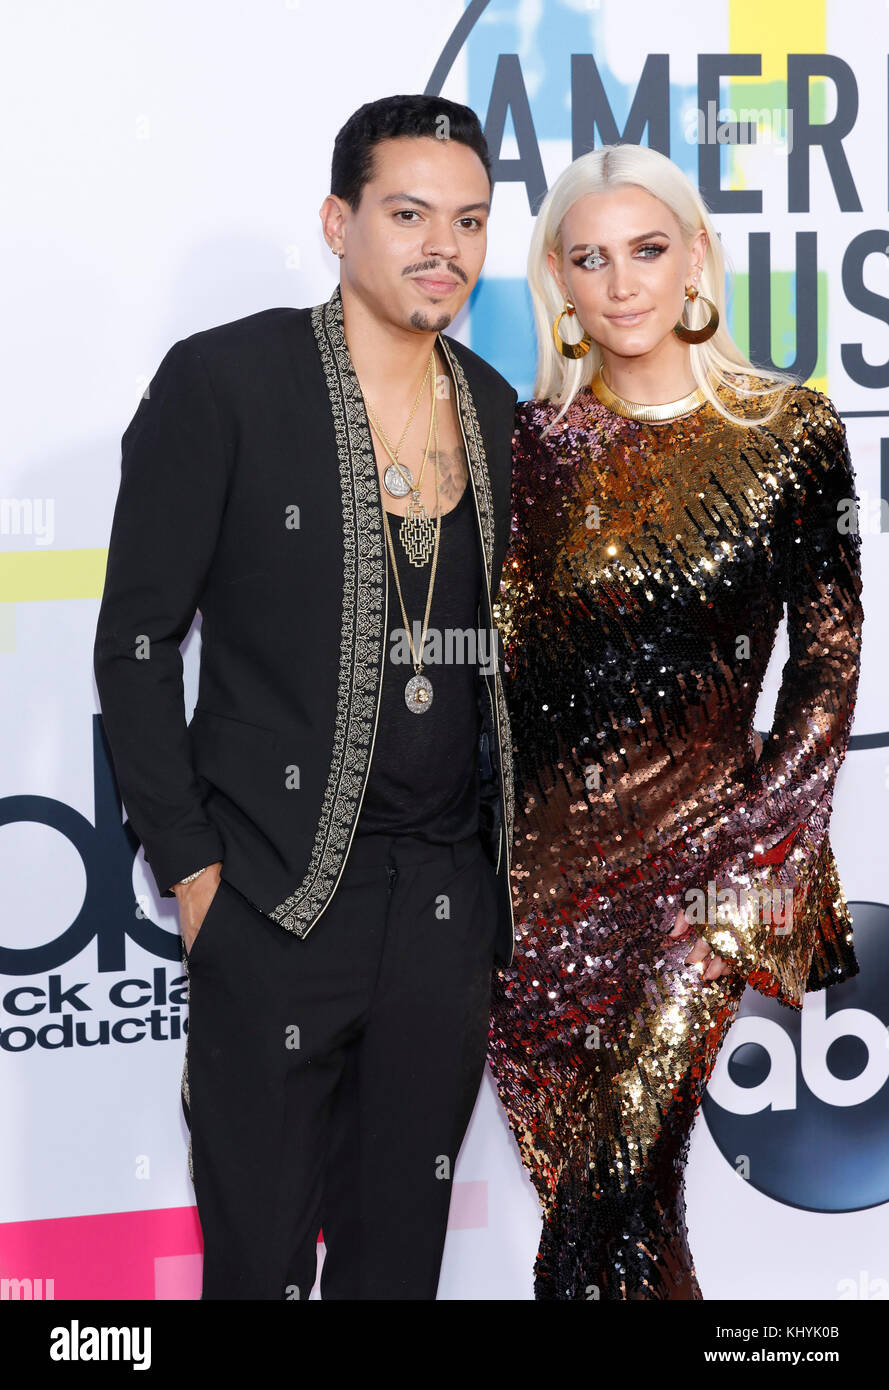 Evan Ross and Ashlee Simpson attend the 2017 American Music Awards, AMAs, at Microsoft Theatre in Los Angeles, USA, on 19 November 2017. Photo: Hubert Boesl - NO WIRE SERVICE - Photo: Hubert Boesl/dpa Stock Photo